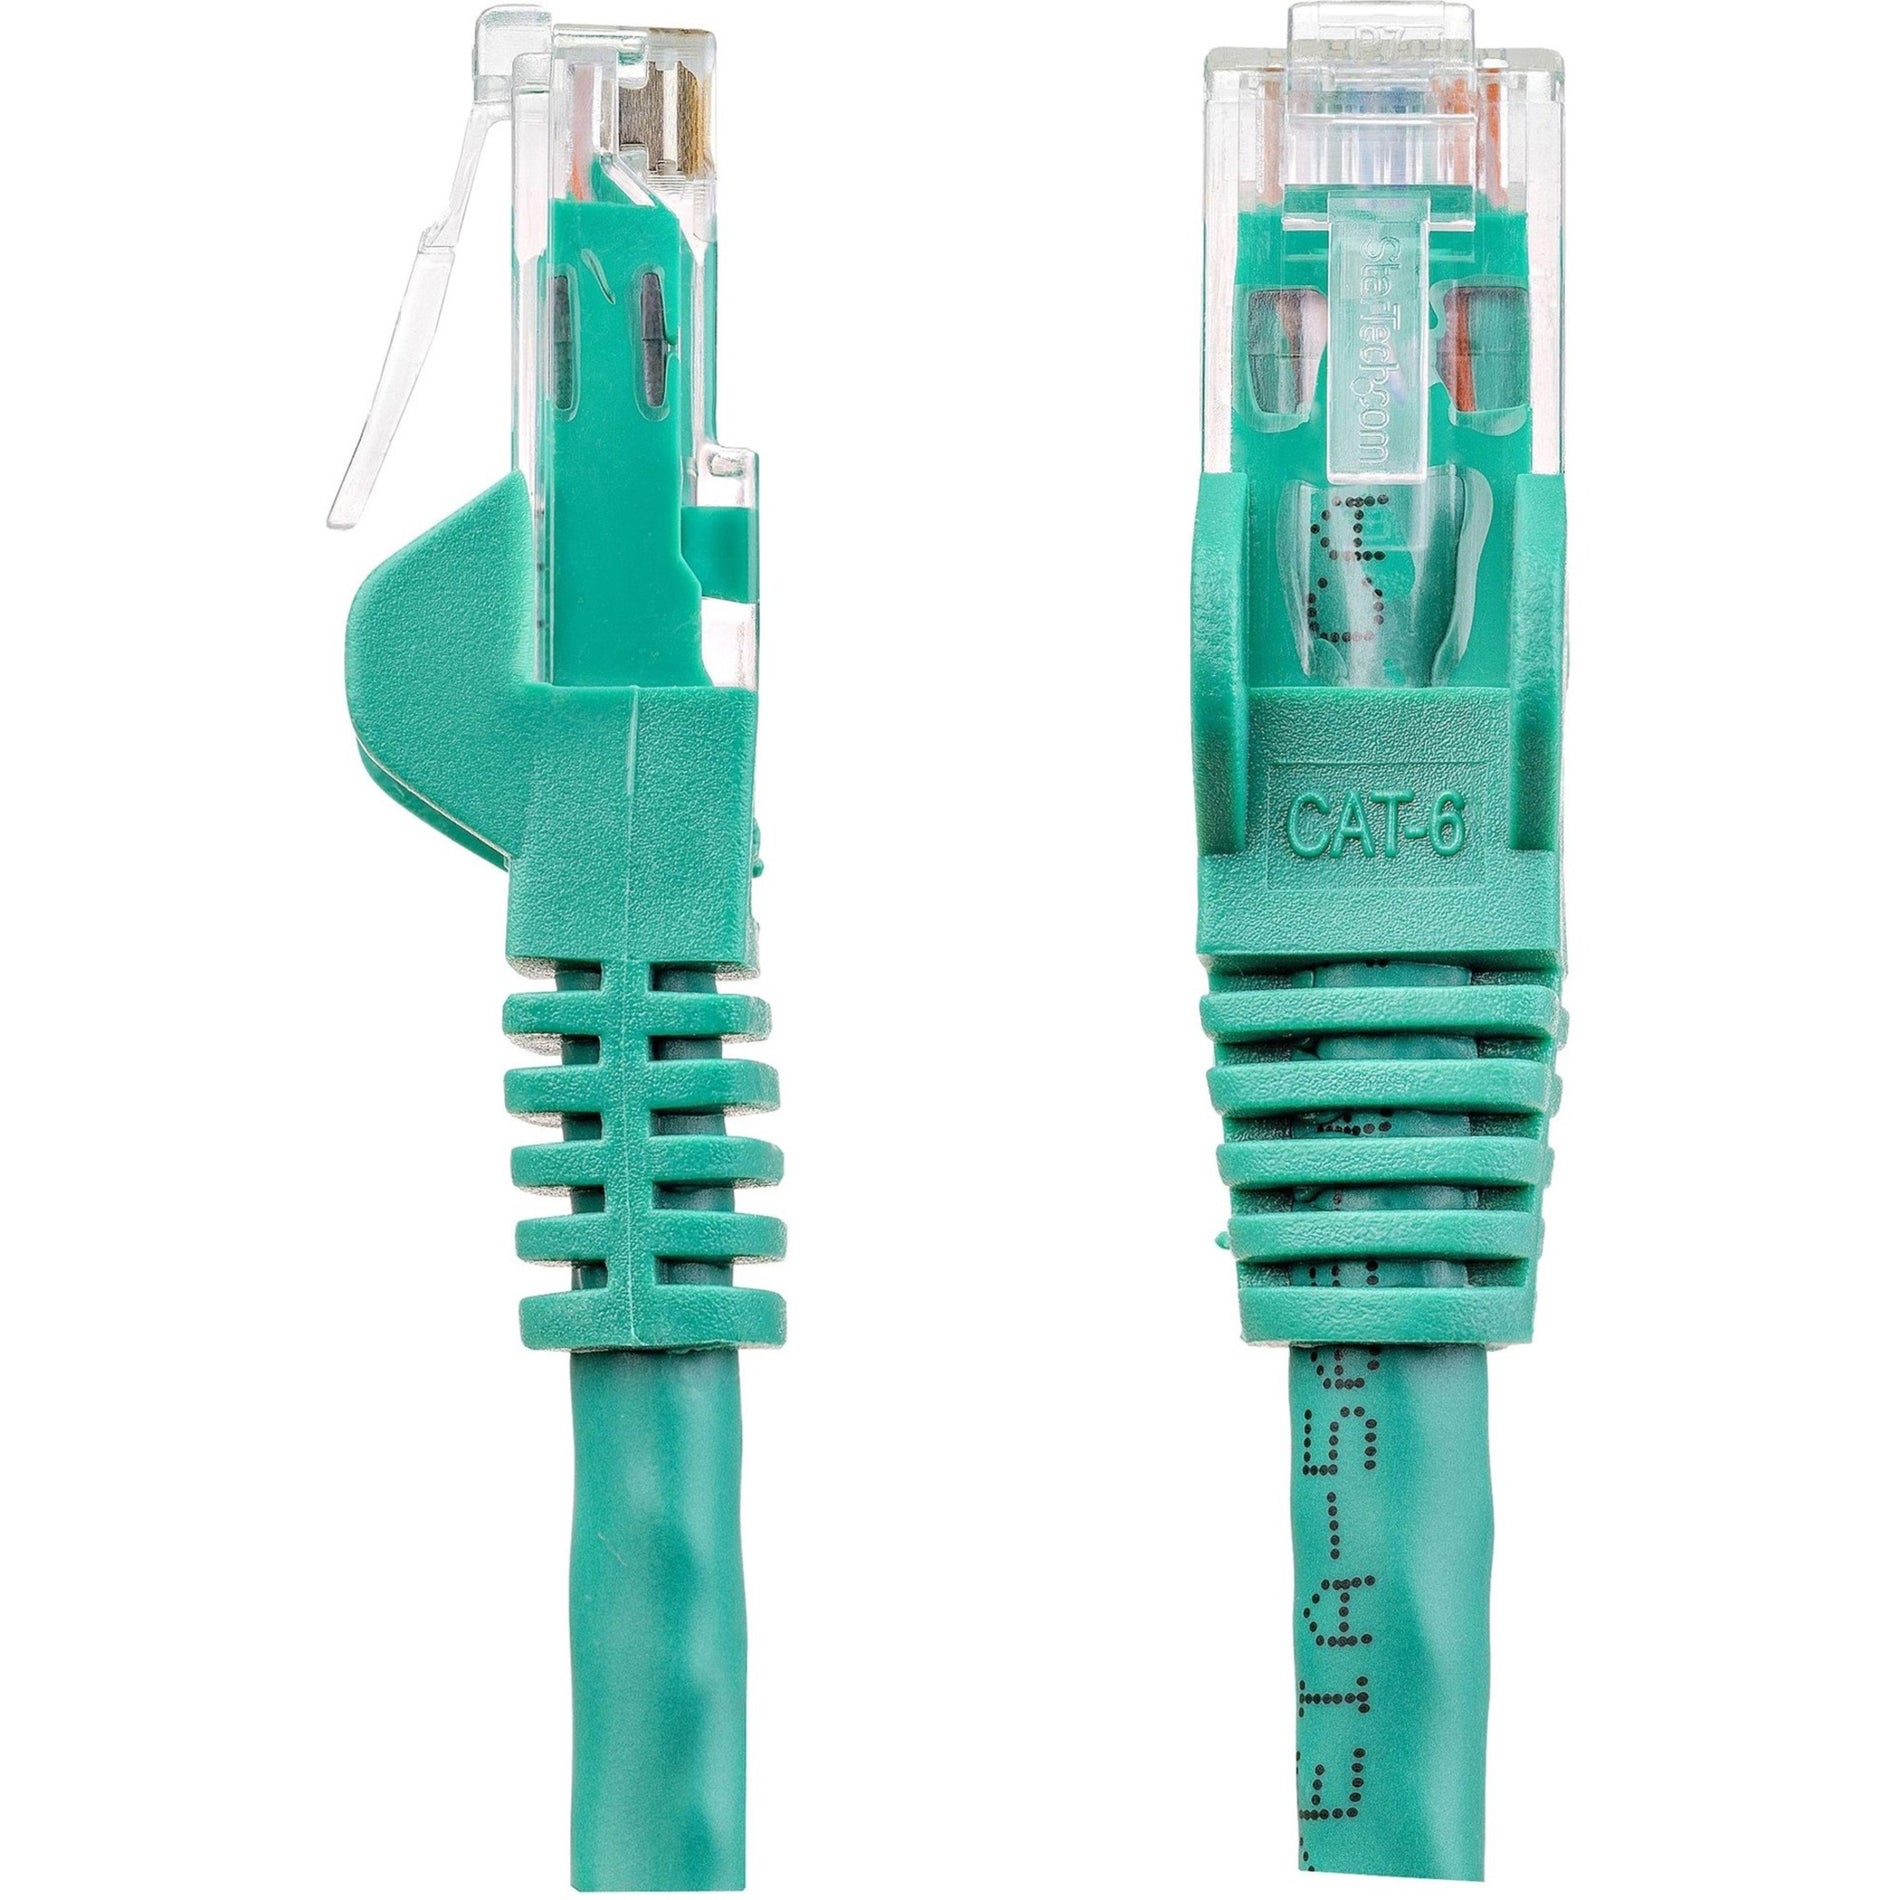 StarTech.com N6PATCH20GN Cat. 6 Network Cable 20ft Green Ethernet Cable Snagless RJ45 Connectors  スタートゥコム N6PATCH20GN Cat. 6 ネットワークケーブル、20フィート グリーン イーサネットケーブル、スナッグレス RJ45 コネクタ